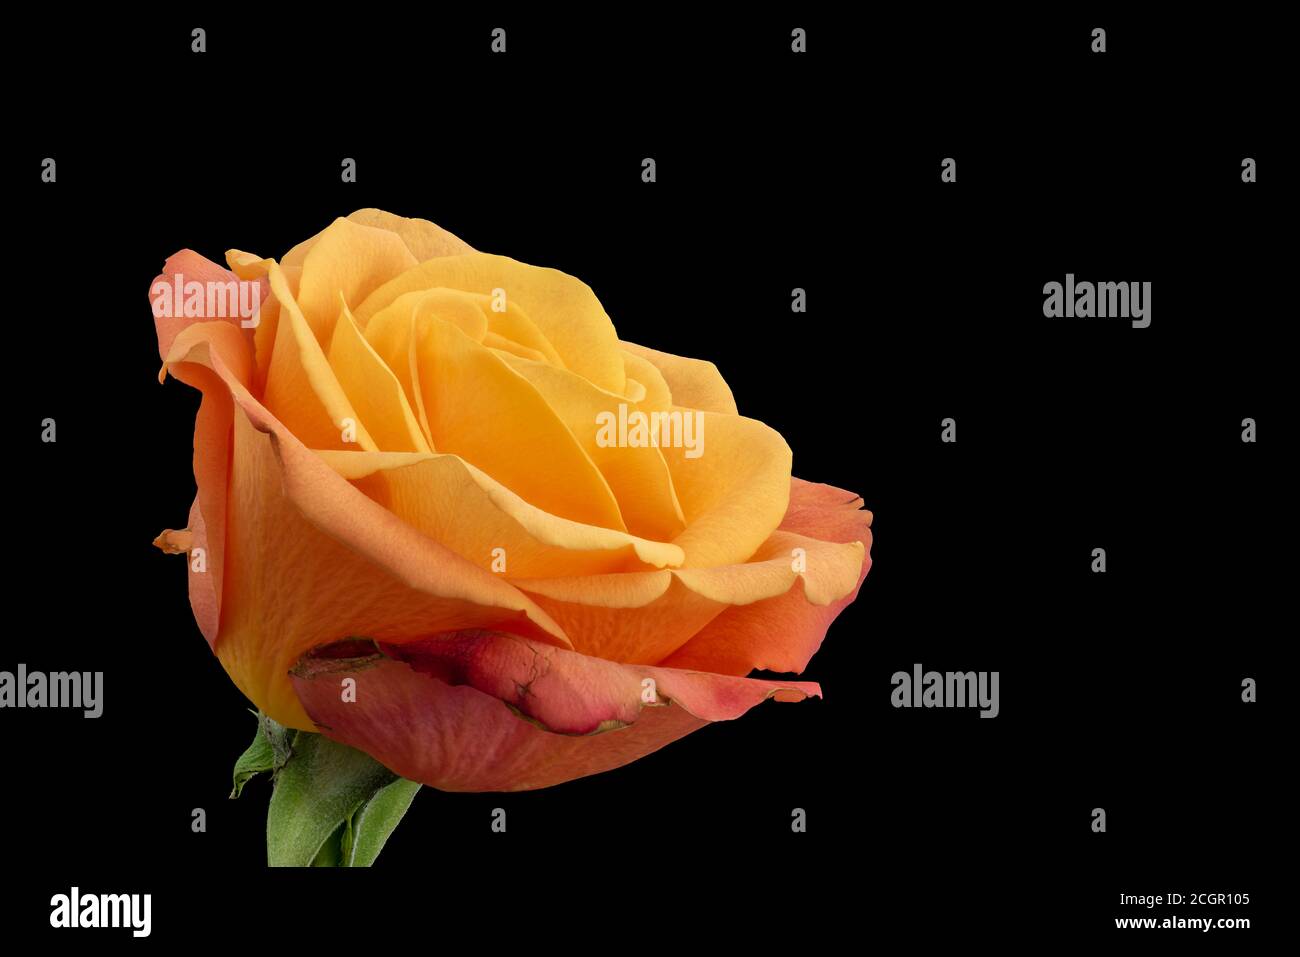 orange yellow rose blossom with leaves macro on black background in vintage painting style Stock Photo